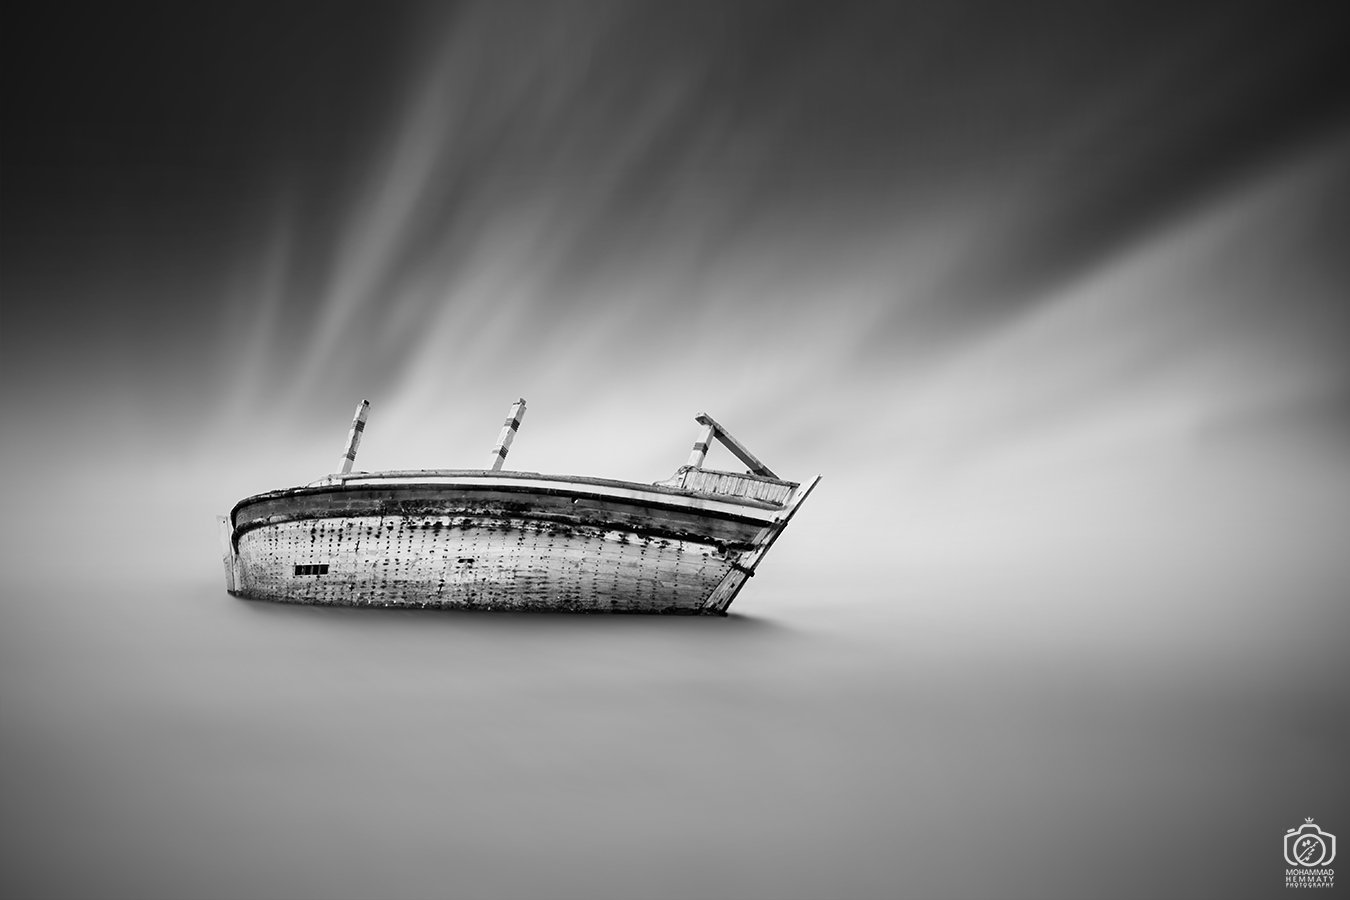 longexposure , sea , nature , strong , blackandwhite , life , ship , alone , canon , lonely , world ,photography , tired , fineart , dhow , canon80d, Mohammad Hemmaty